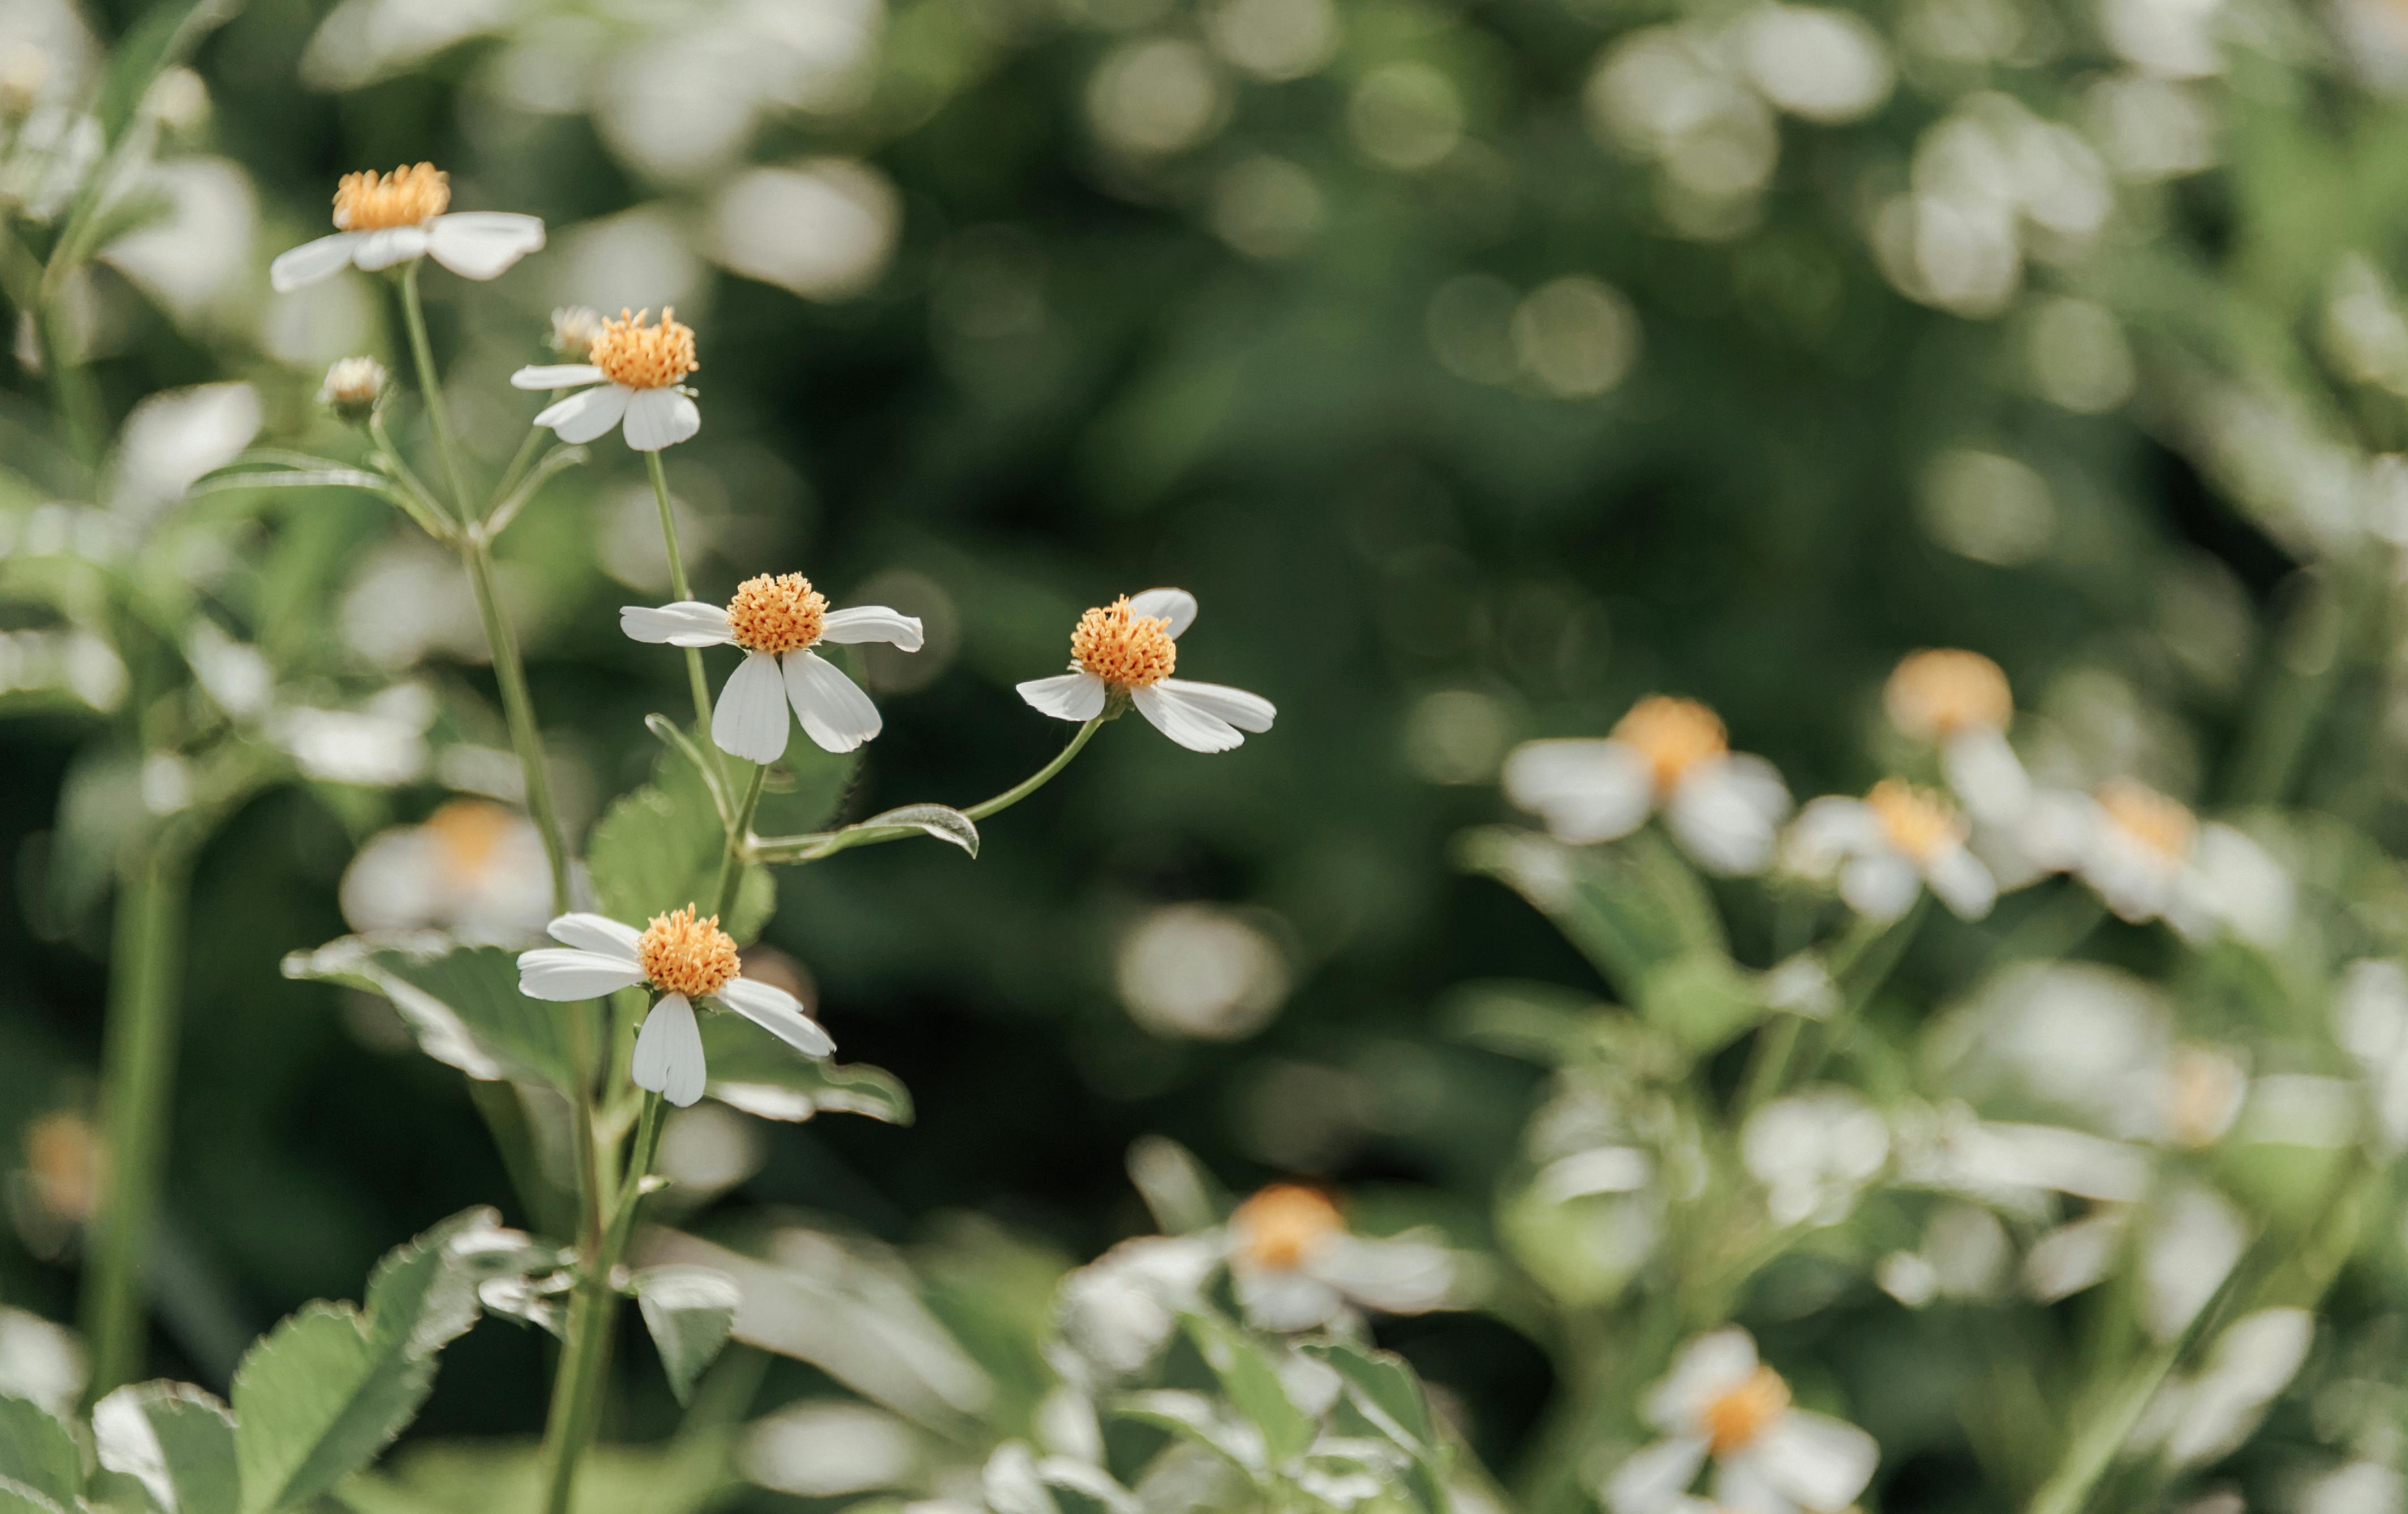 Close Up Photo of a Bed of White Flowers · Free Stock Photo - 4256 x 2676 jpeg 1244kB